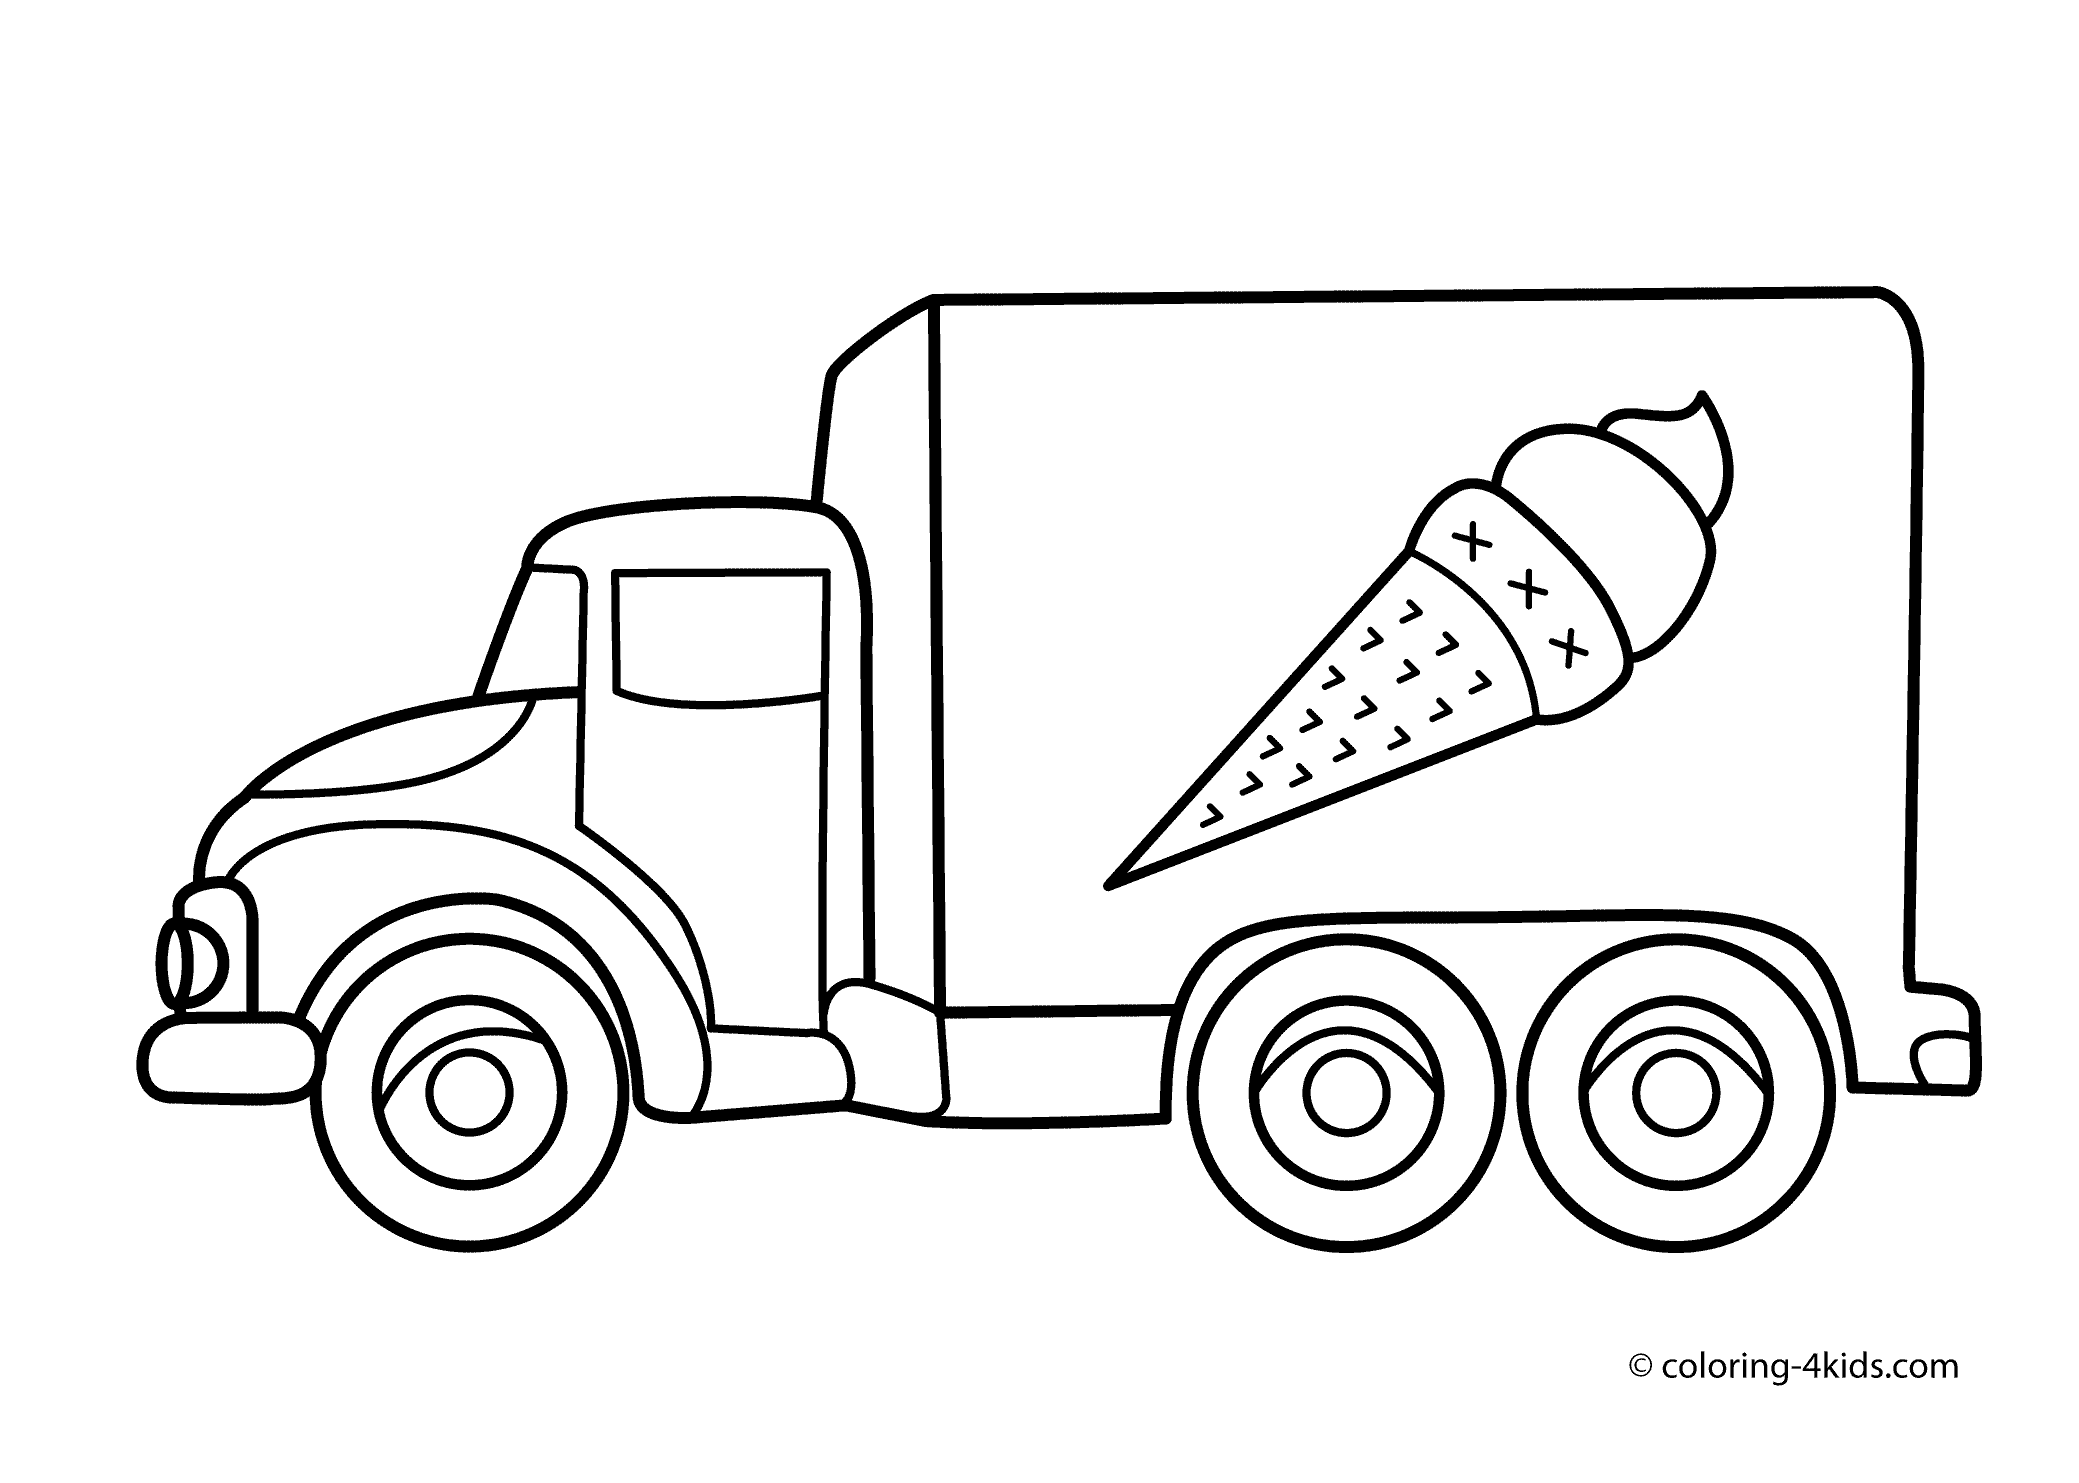 Icecream truck transportation coloring pages for kids